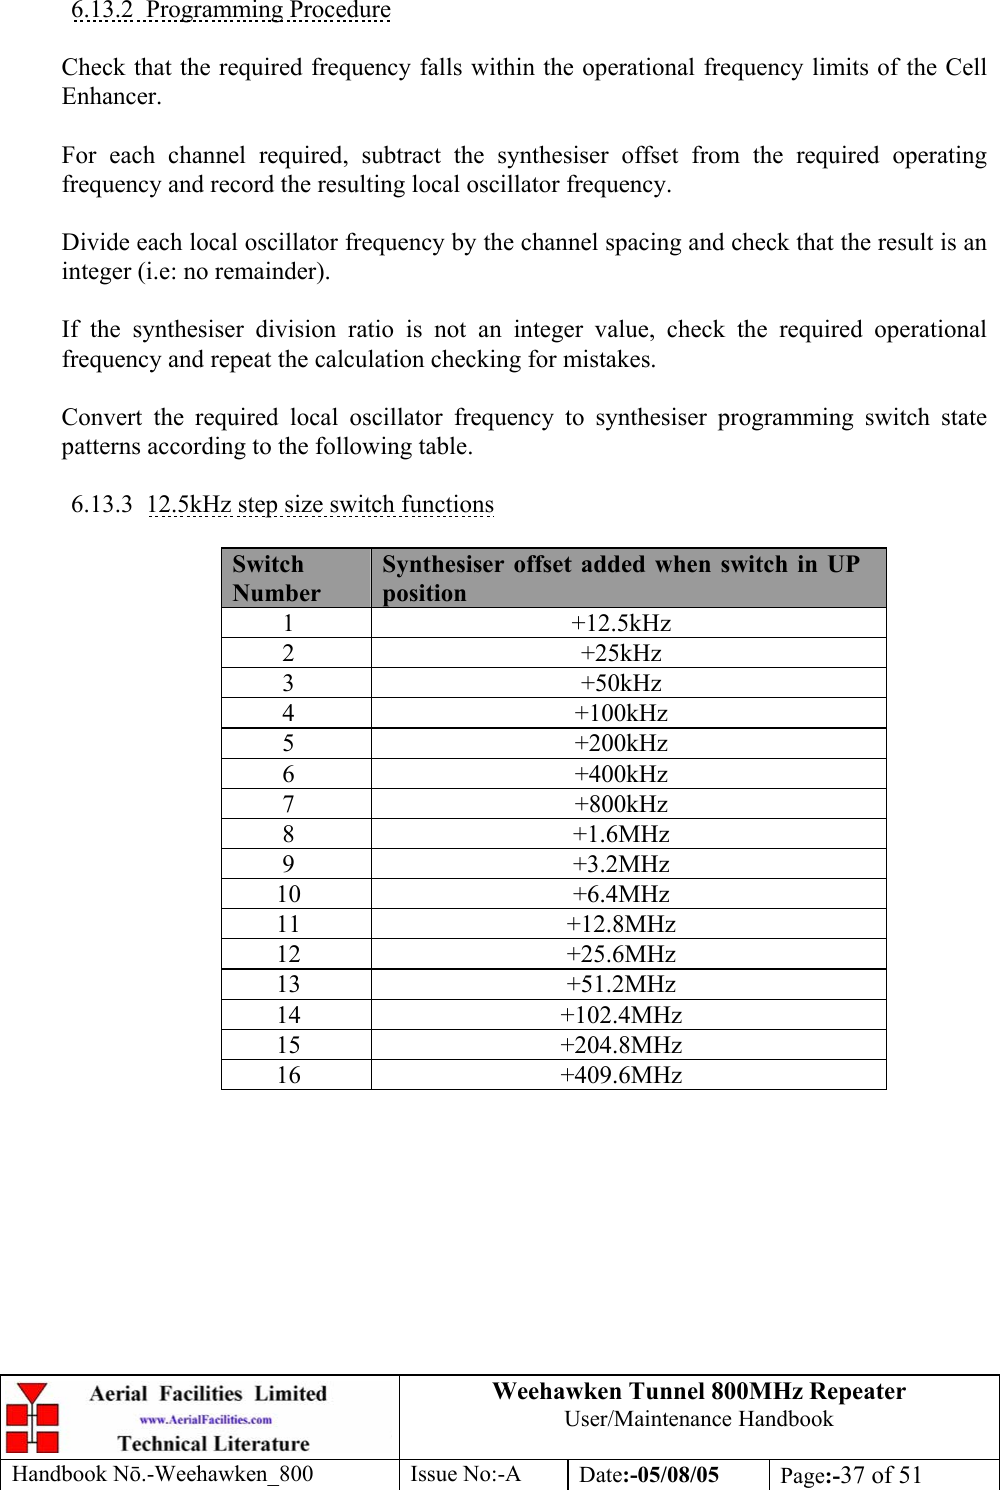 Weehawken Tunnel 800MHz Repeater User/Maintenance Handbook Handbook N.-Weehawken_800 Issue No:-A Date:-05/08/05  Page:-37 of 51   6.13.2 Programming Procedure  Check that the required frequency falls within the operational frequency limits of the Cell Enhancer.  For each channel required, subtract the synthesiser offset from the required operating frequency and record the resulting local oscillator frequency.  Divide each local oscillator frequency by the channel spacing and check that the result is an integer (i.e: no remainder).  If the synthesiser division ratio is not an integer value, check the required operational frequency and repeat the calculation checking for mistakes.  Convert the required local oscillator frequency to synthesiser programming switch state patterns according to the following table.  6.13.3 12.5kHz step size switch functions  Switch Number Synthesiser offset added when switch in UP position 1 +12.5kHz 2 +25kHz 3 +50kHz 4 +100kHz 5 +200kHz 6 +400kHz 7 +800kHz 8 +1.6MHz 9 +3.2MHz 10 +6.4MHz 11 +12.8MHz 12 +25.6MHz 13 +51.2MHz 14 +102.4MHz 15 +204.8MHz 16 +409.6MHz    